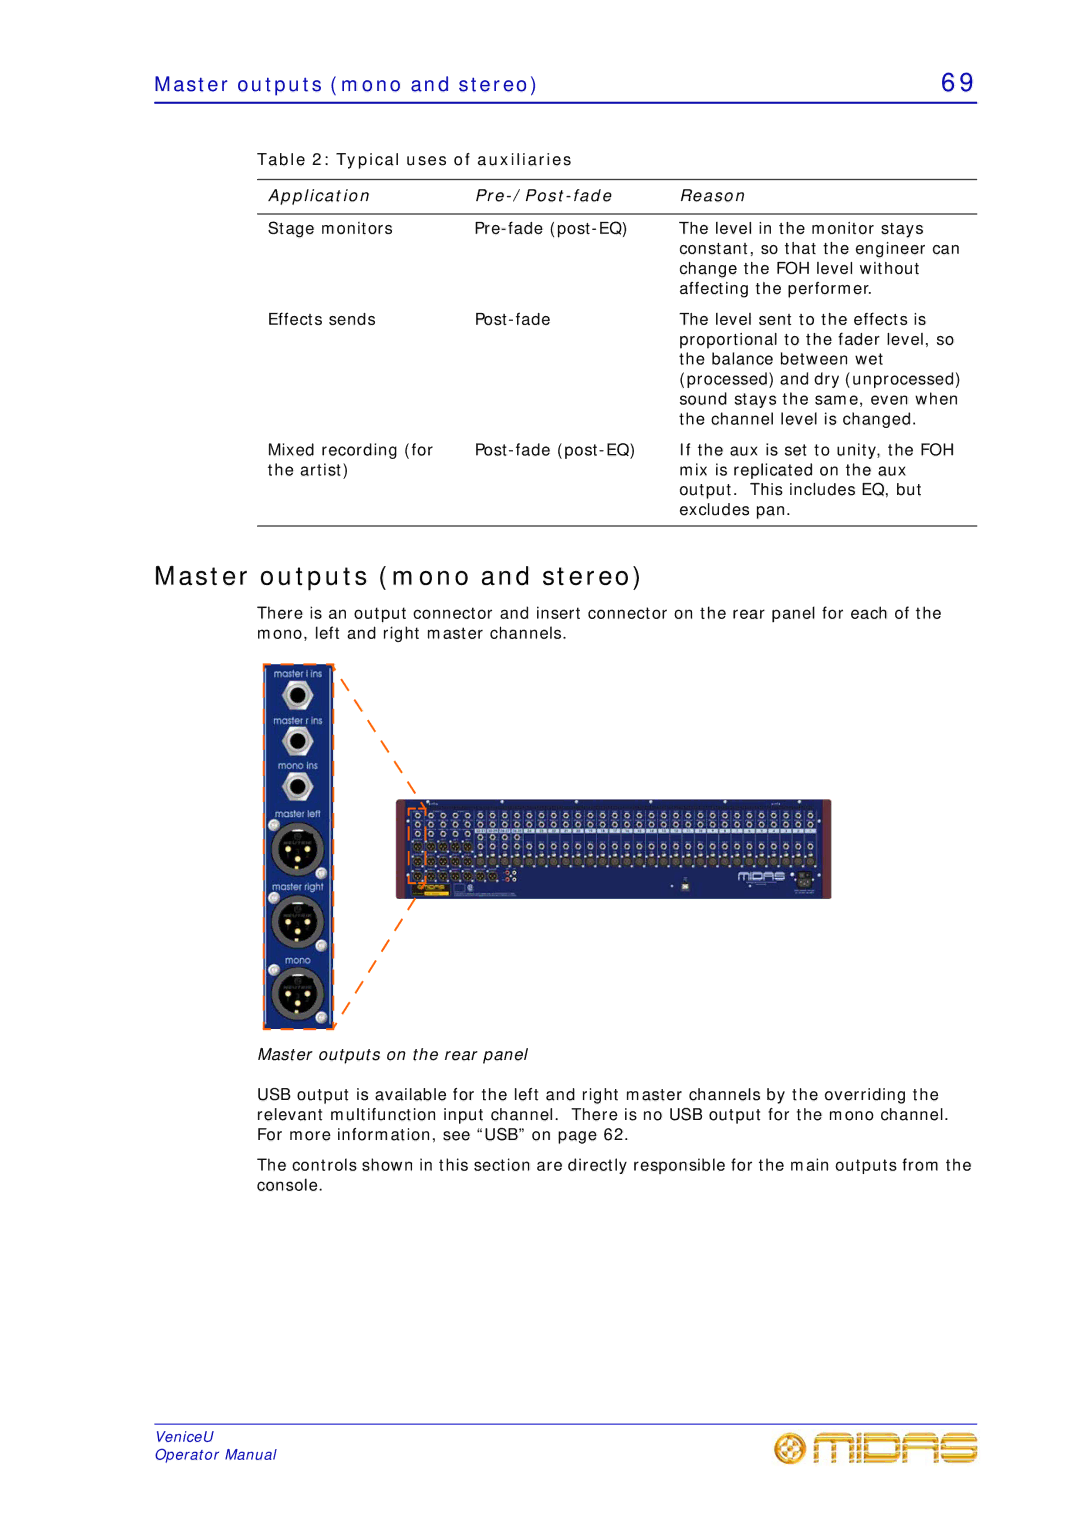 Midas Consoles U24, U32, U16 technical specifications Master outputs mono and stereo 